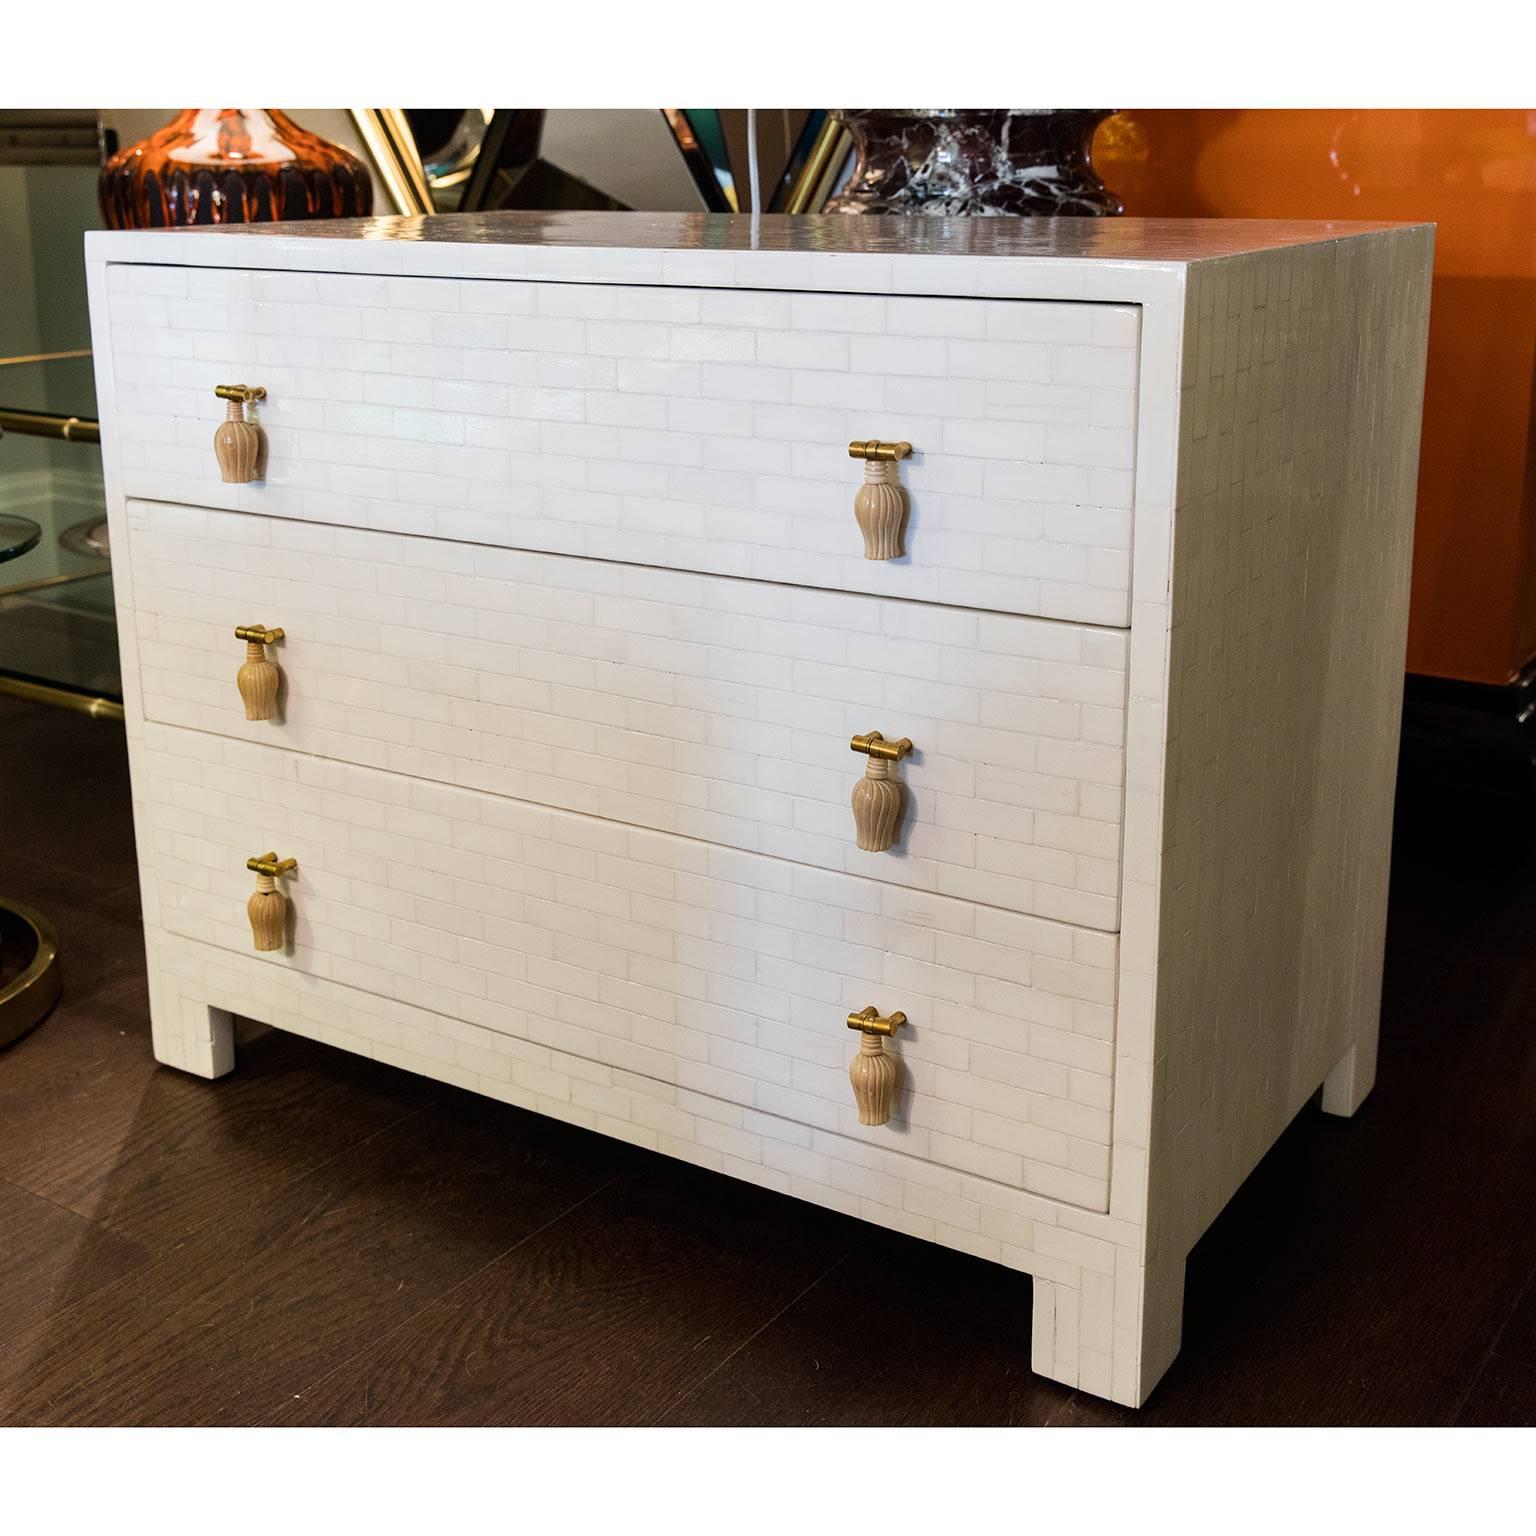 A pair of fabulous three-drawer end chests with bone inlay on wood resin.